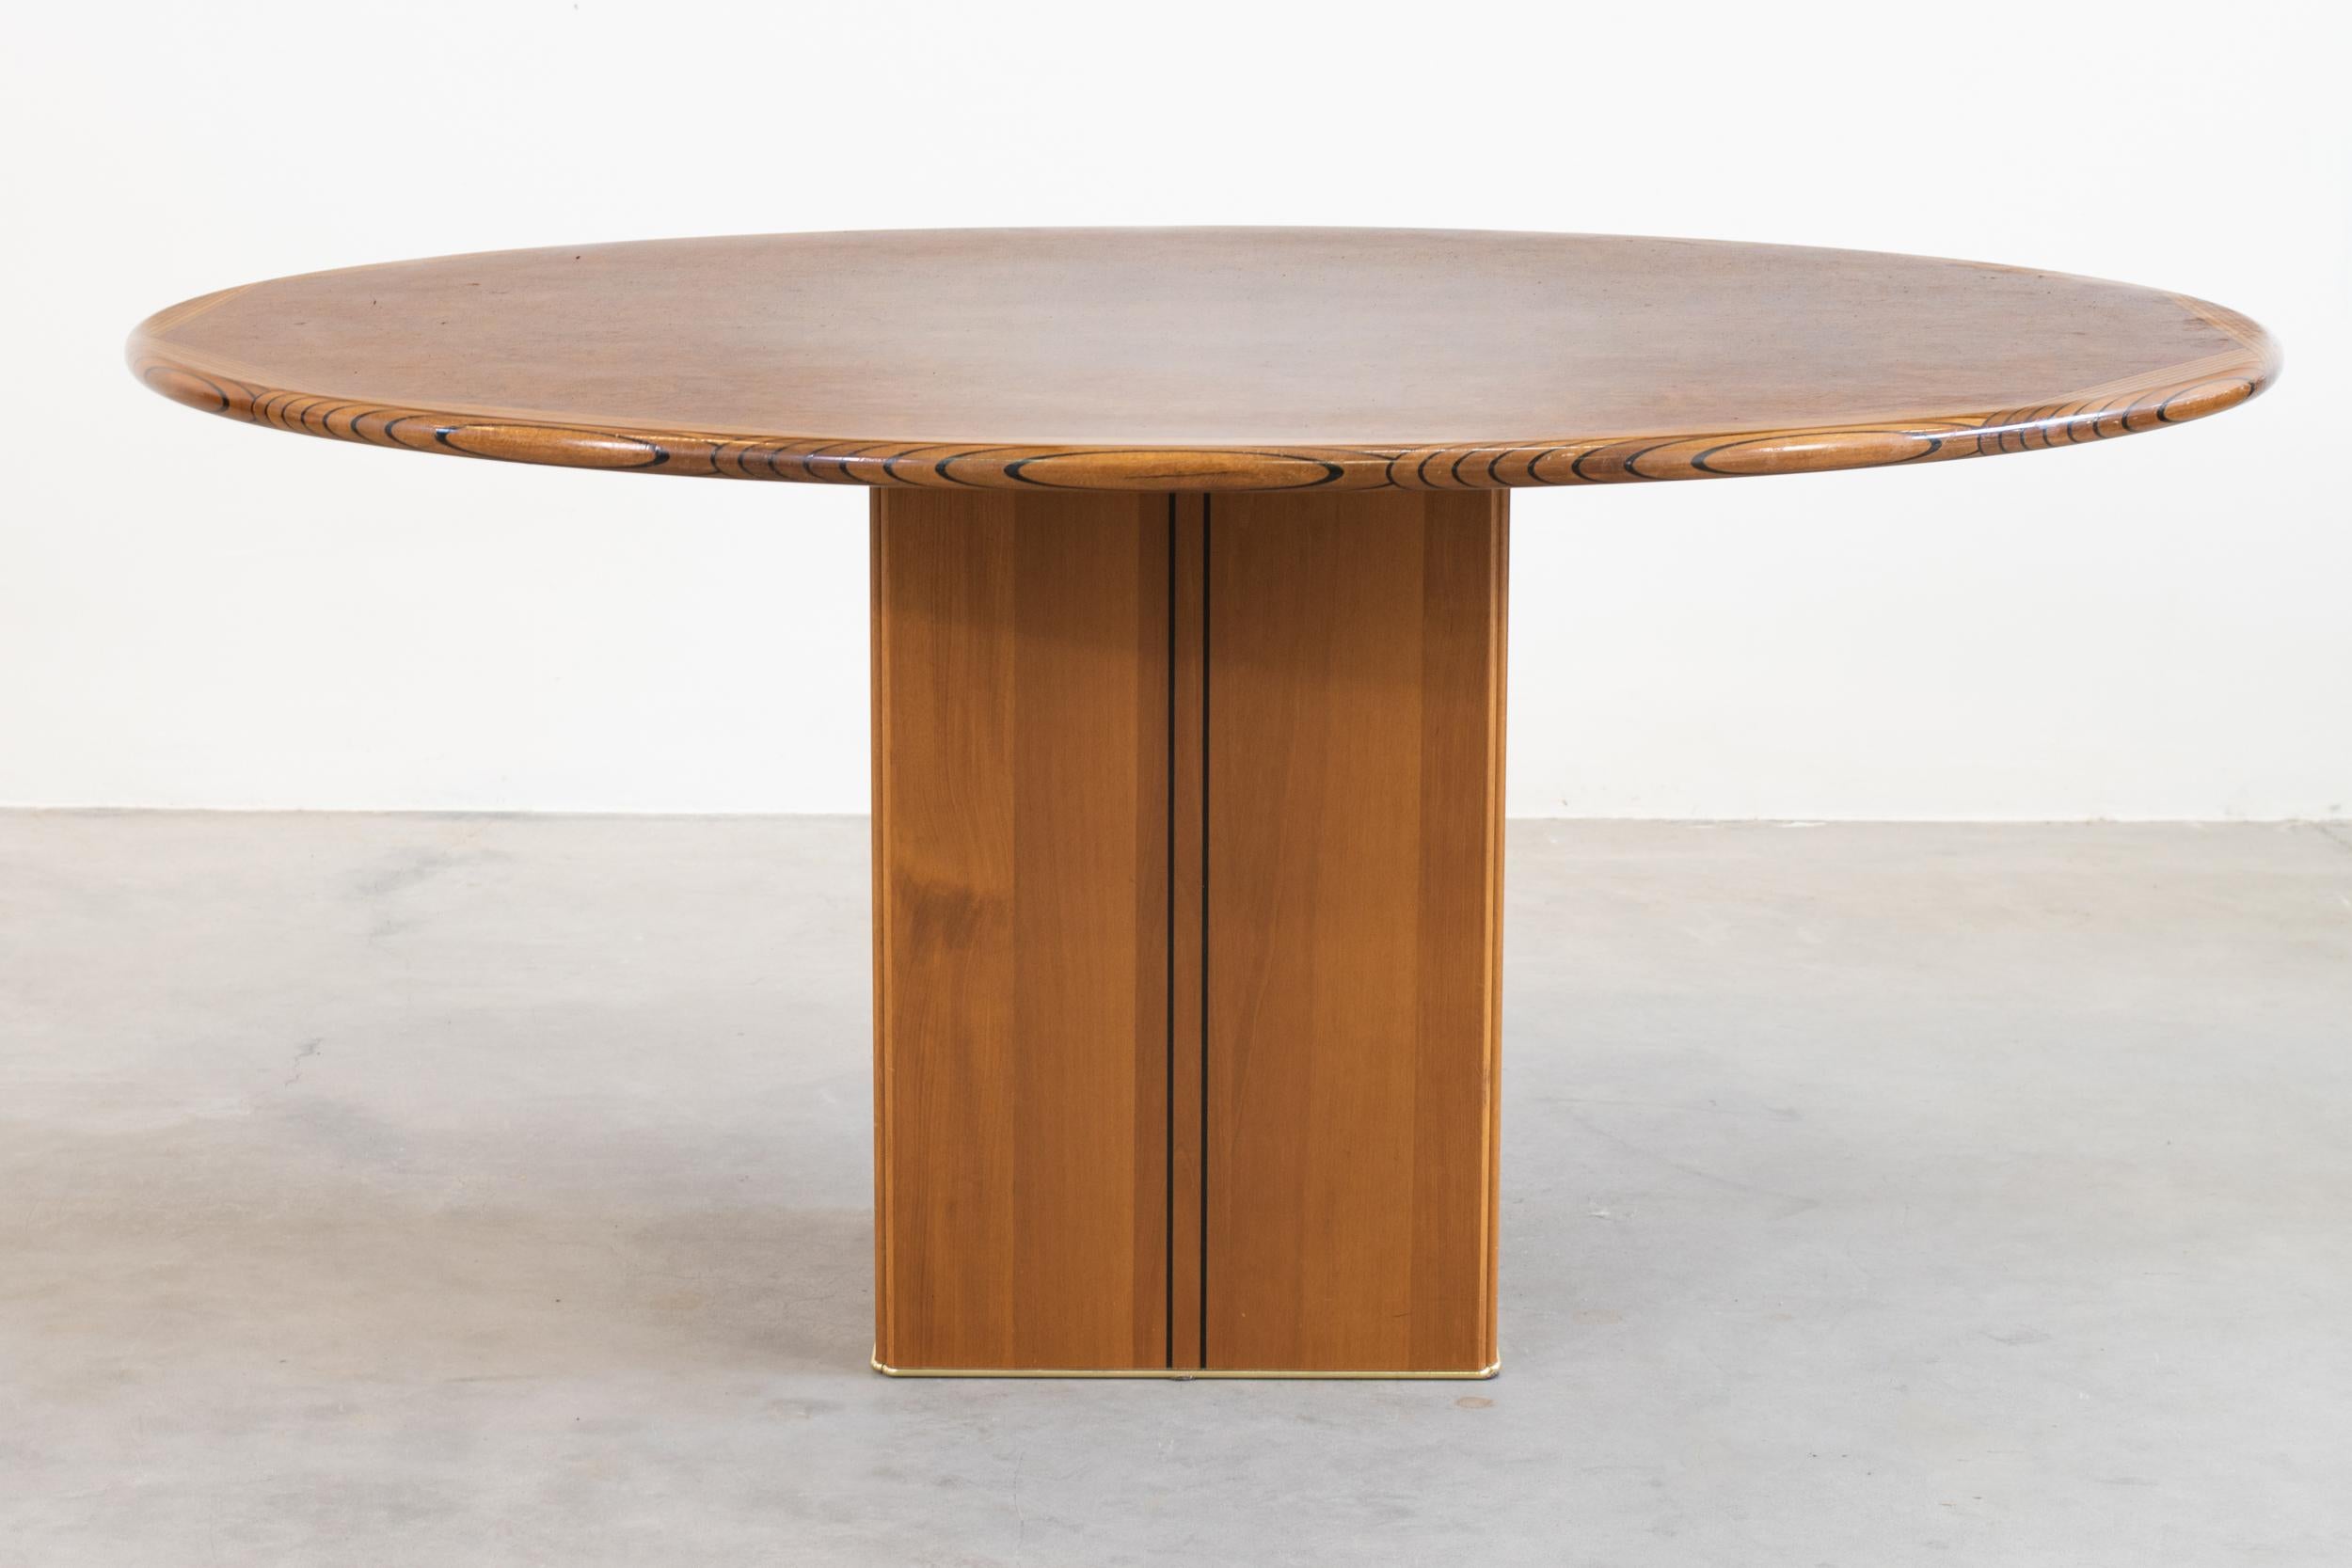 Round dining table designed by Afra and Tobia Scarpa and produced by Maxalto, Italy, 1975
Table in walnut and burl form the Artona series by Maxalto.